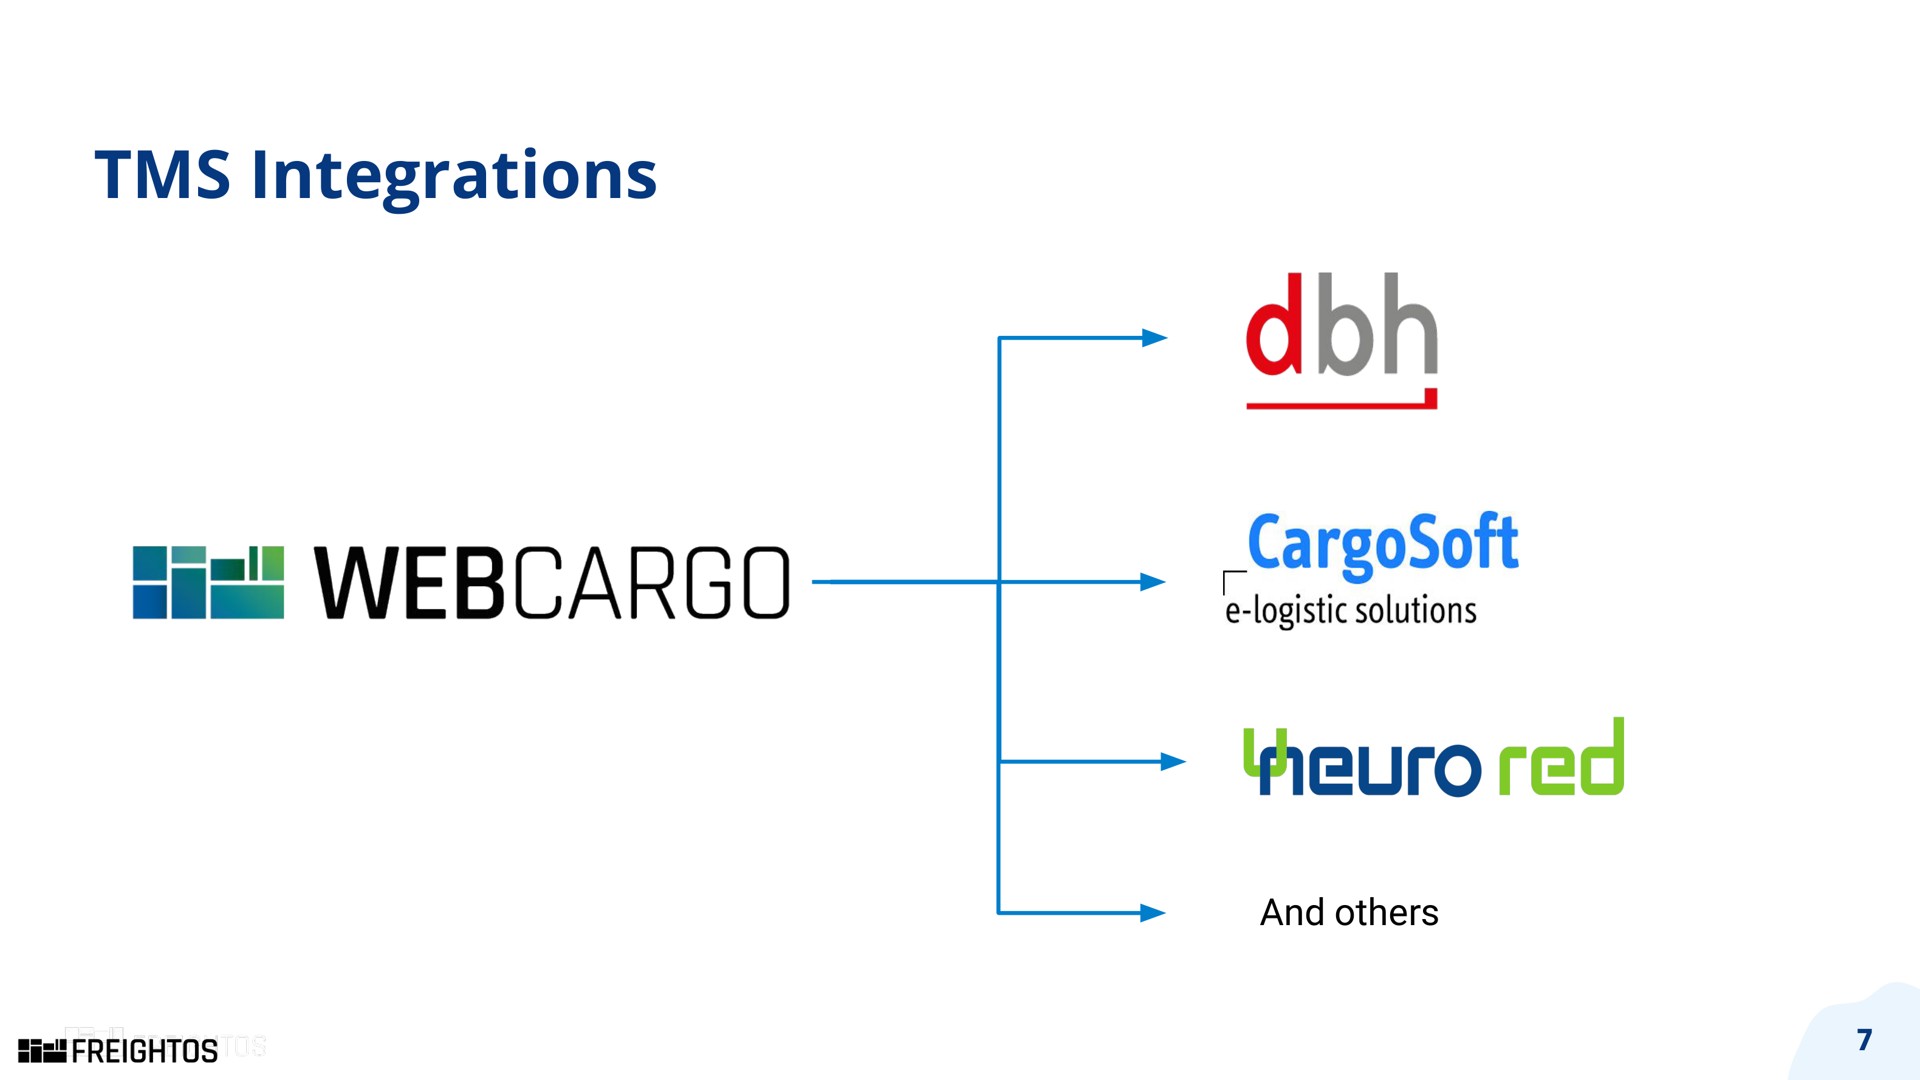 integrations time logistic solutions red and | Freightos